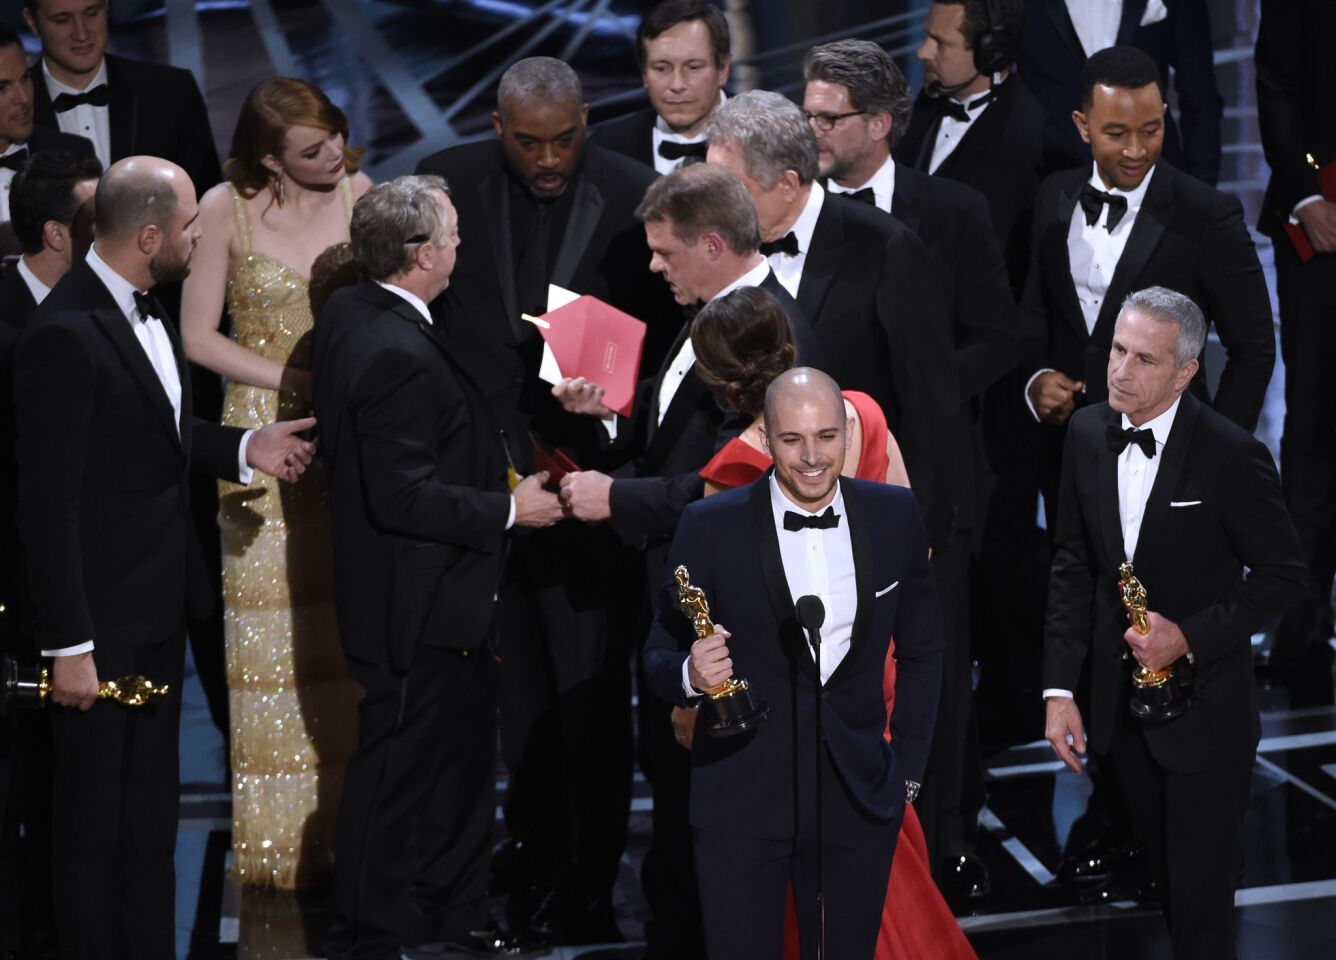 Fred Berger, foreground center, and the cast of "La La Land" mistakenly accept the award for best picture at the Oscars.